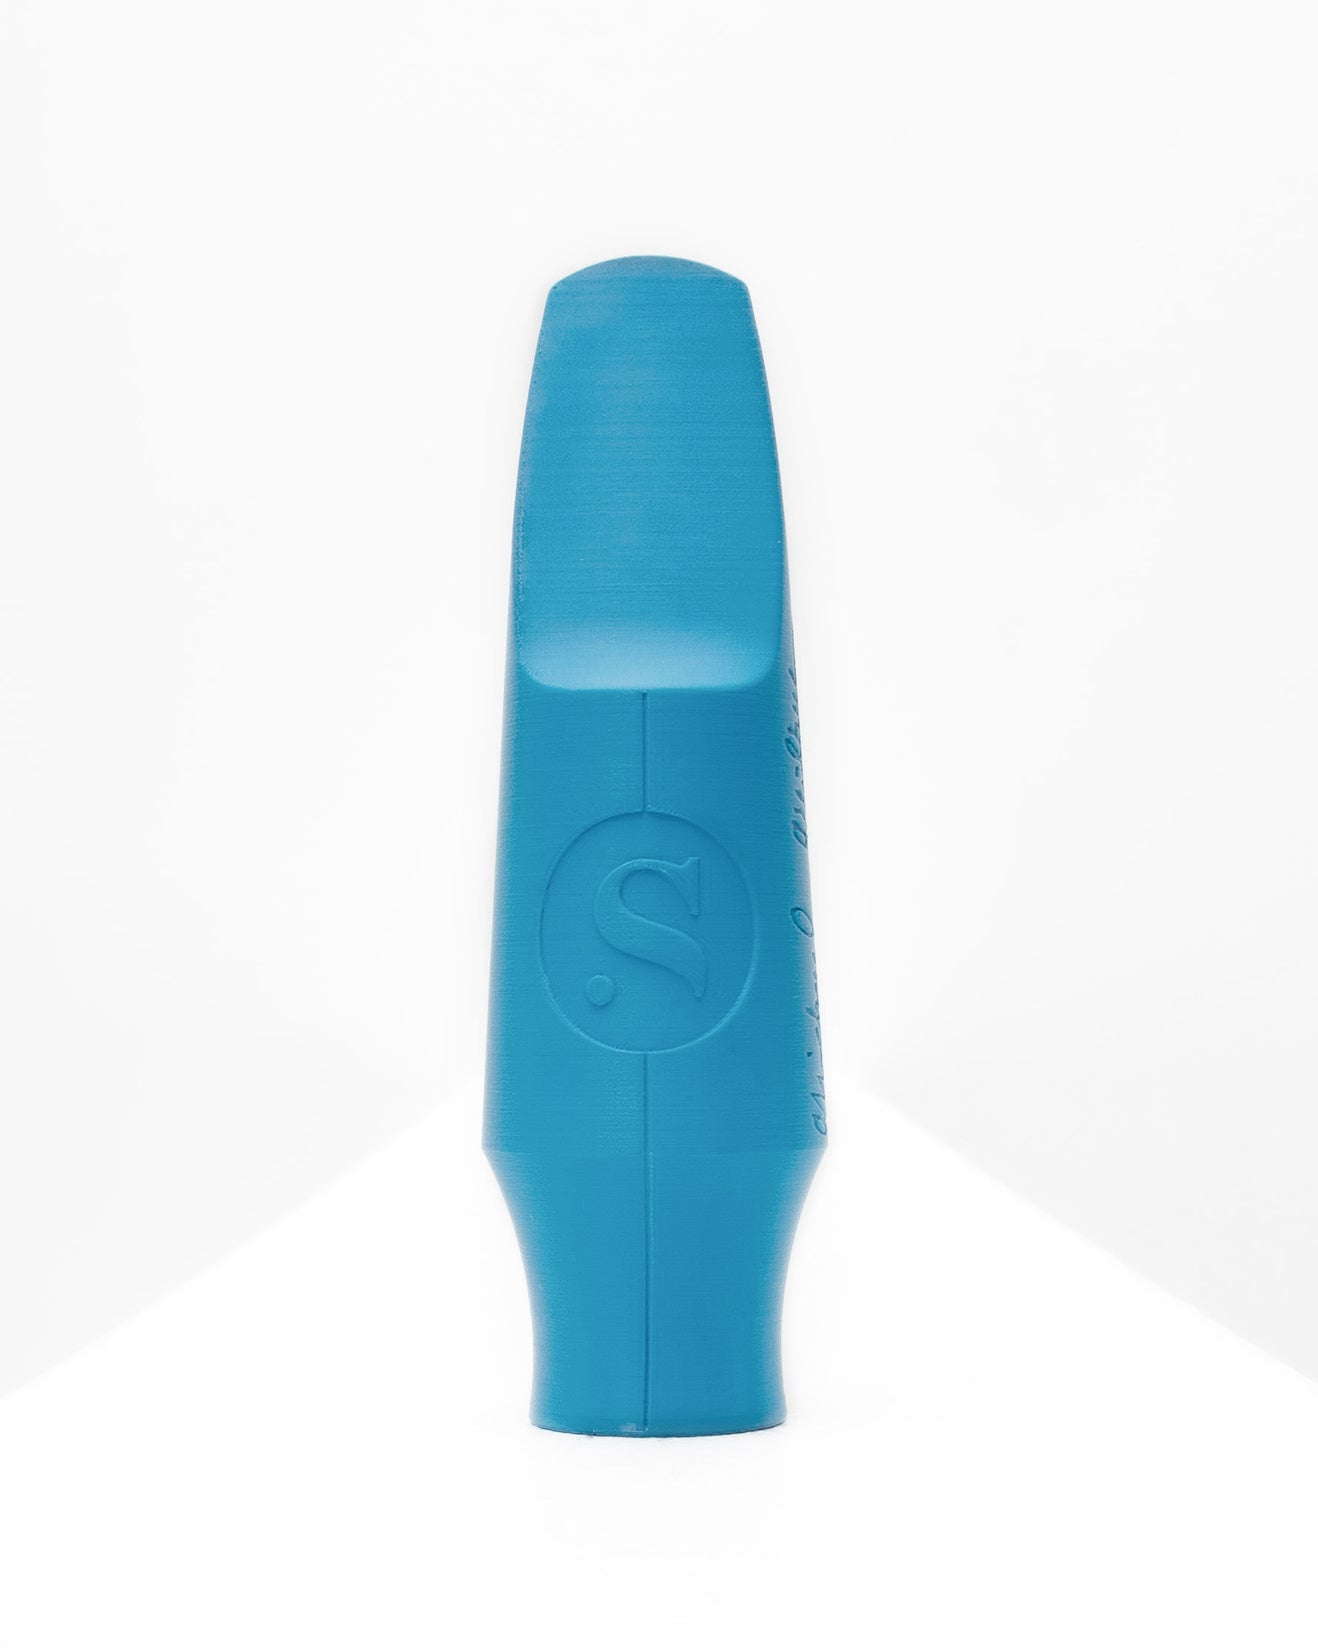 Tenor Originals Saxophone mouthpiece - Steady by Syos - 8 / Sea Blue